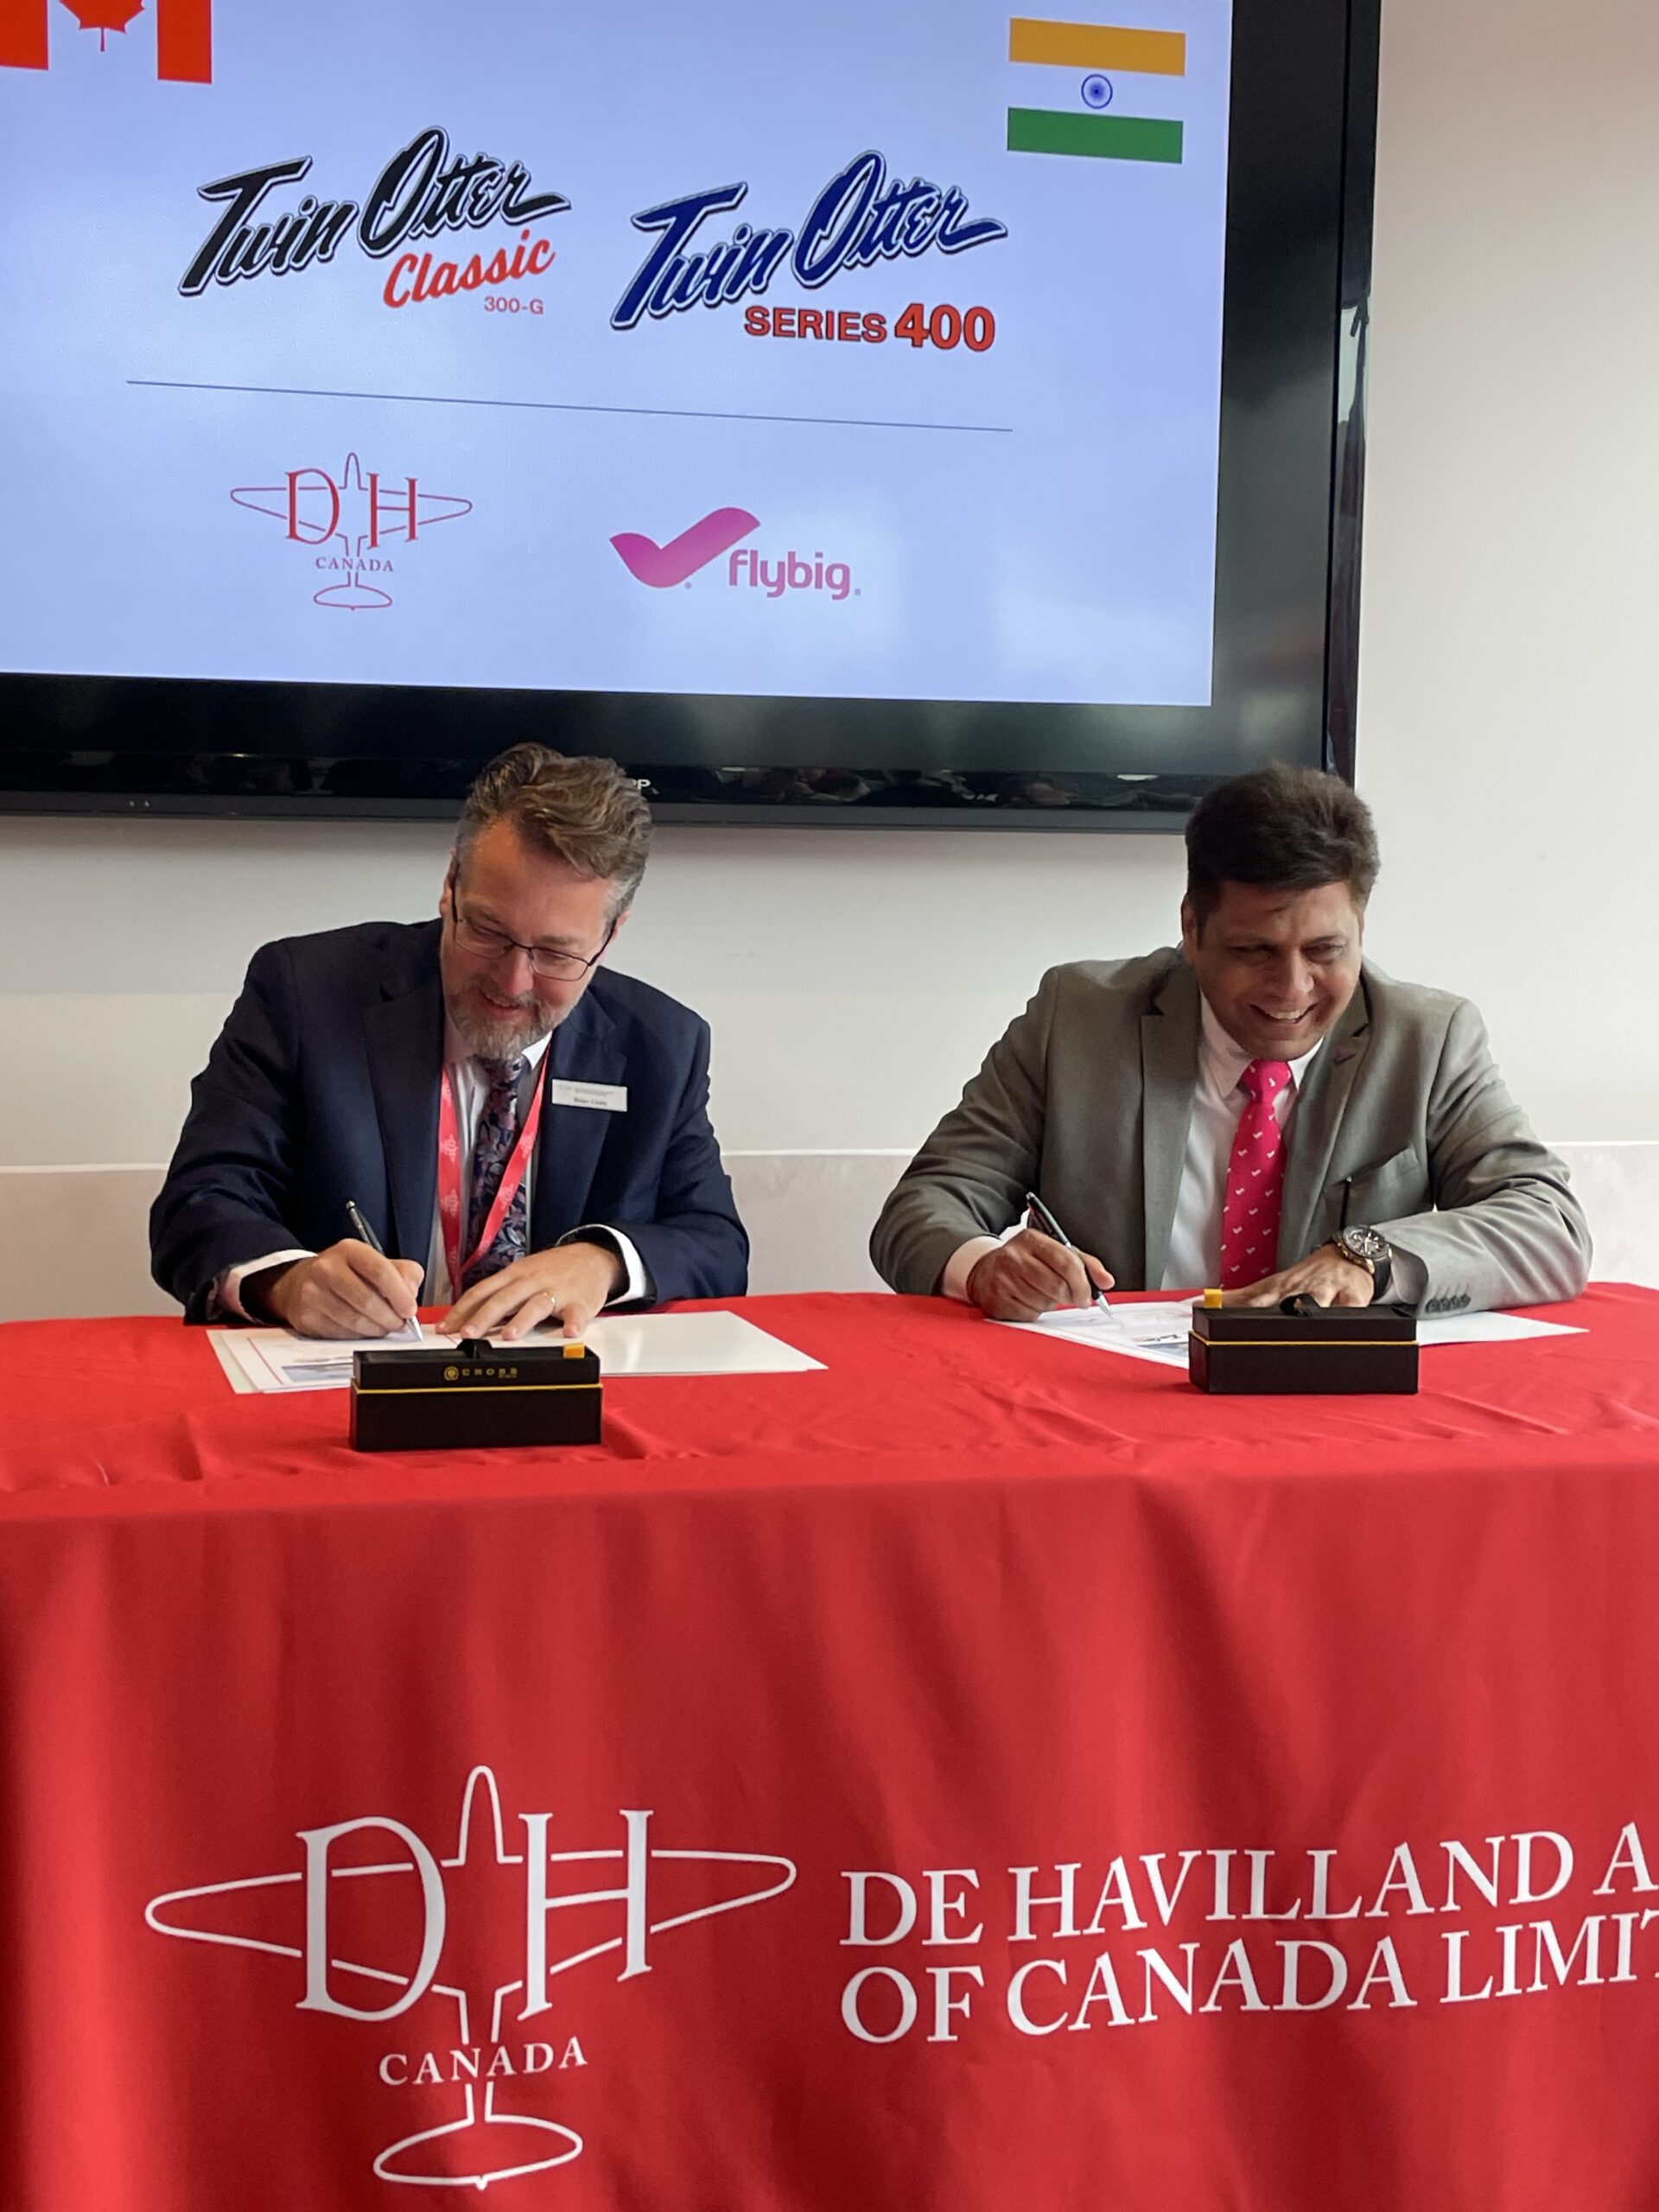 De Havilland Canada and flybig sign Purchase Agreement and Letter of Interest for new DHC-6 Twin Otter aircraft